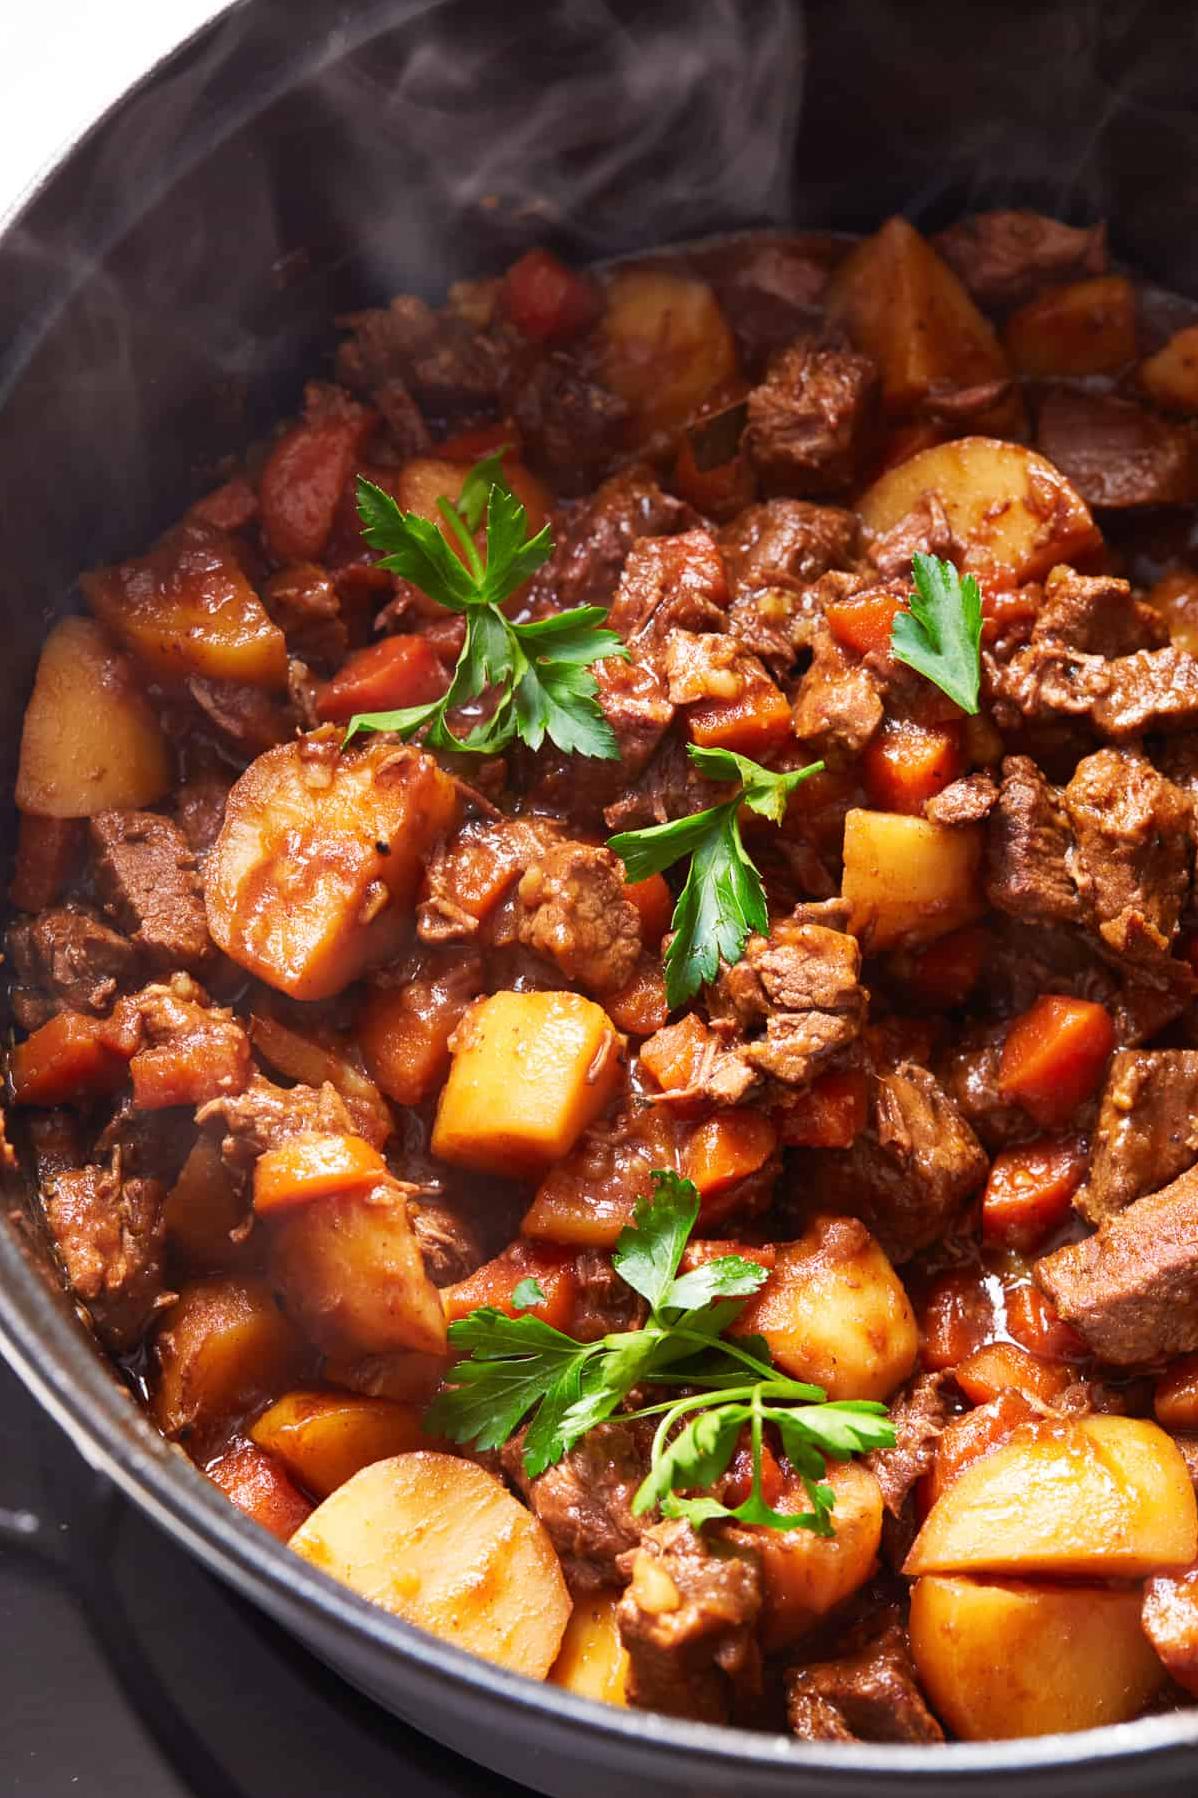  Satisfy your hunger and warm your heart with this delicious stew